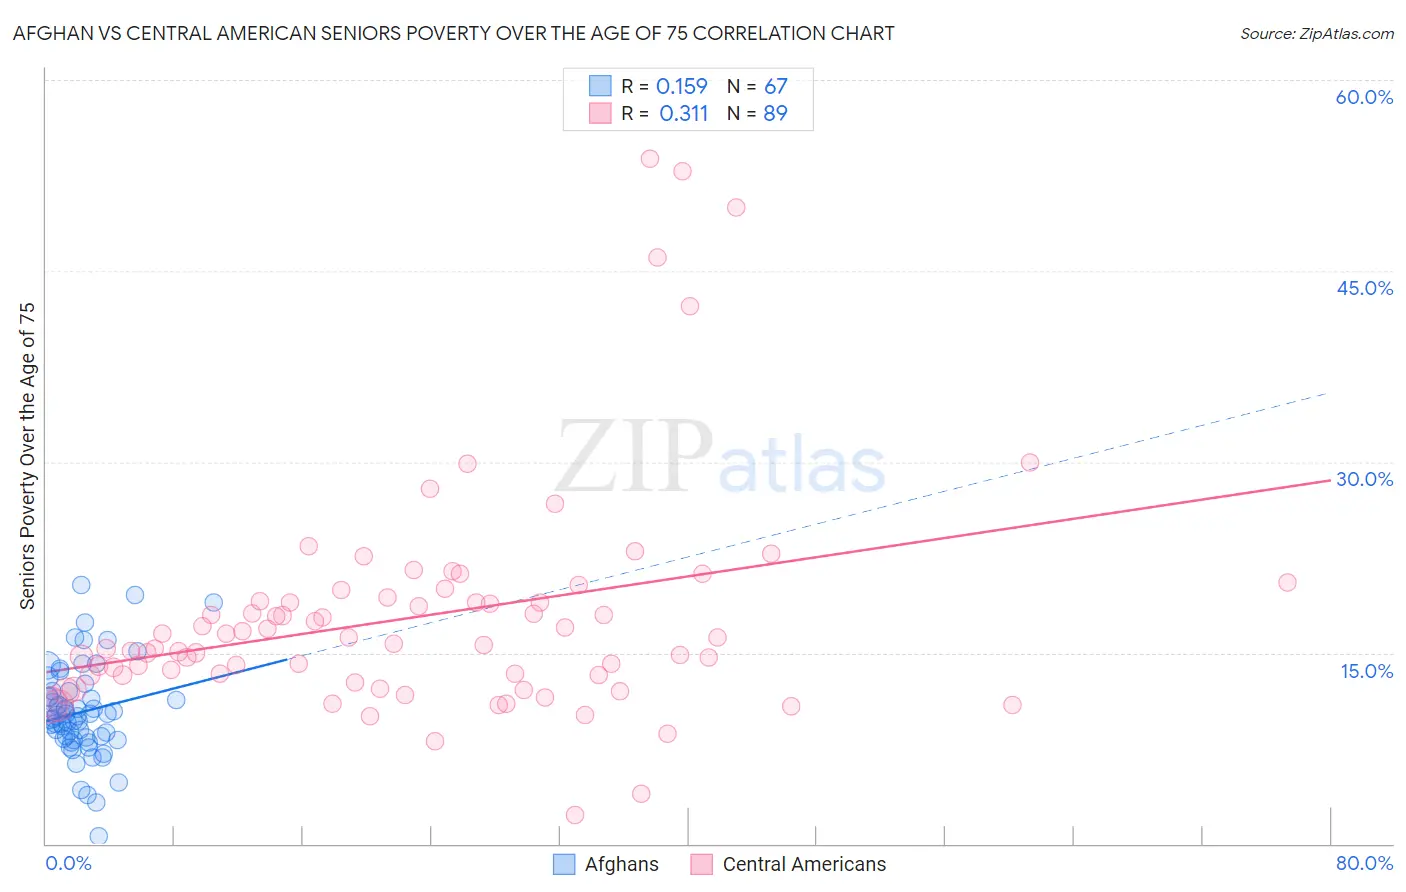 Afghan vs Central American Seniors Poverty Over the Age of 75